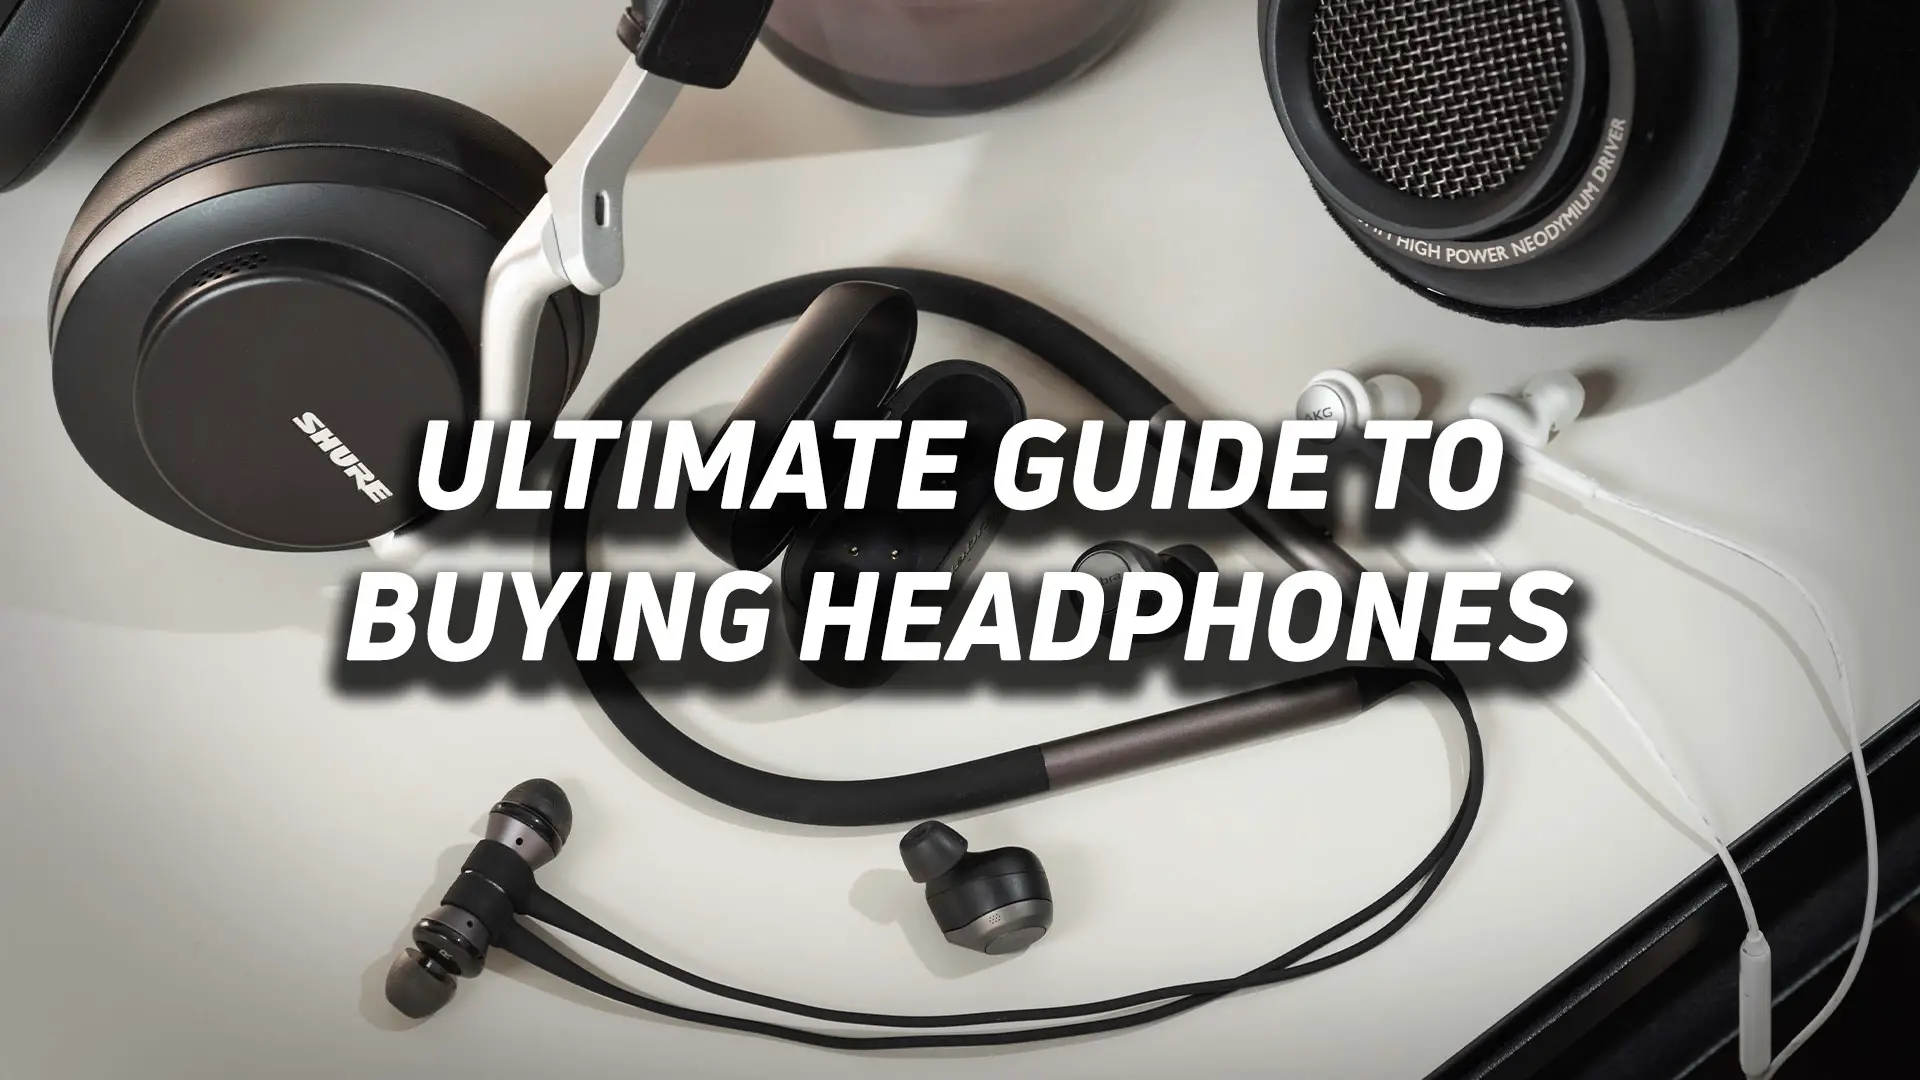 Does Beats Headphones Work With Android Phones? Ultimate Guide!